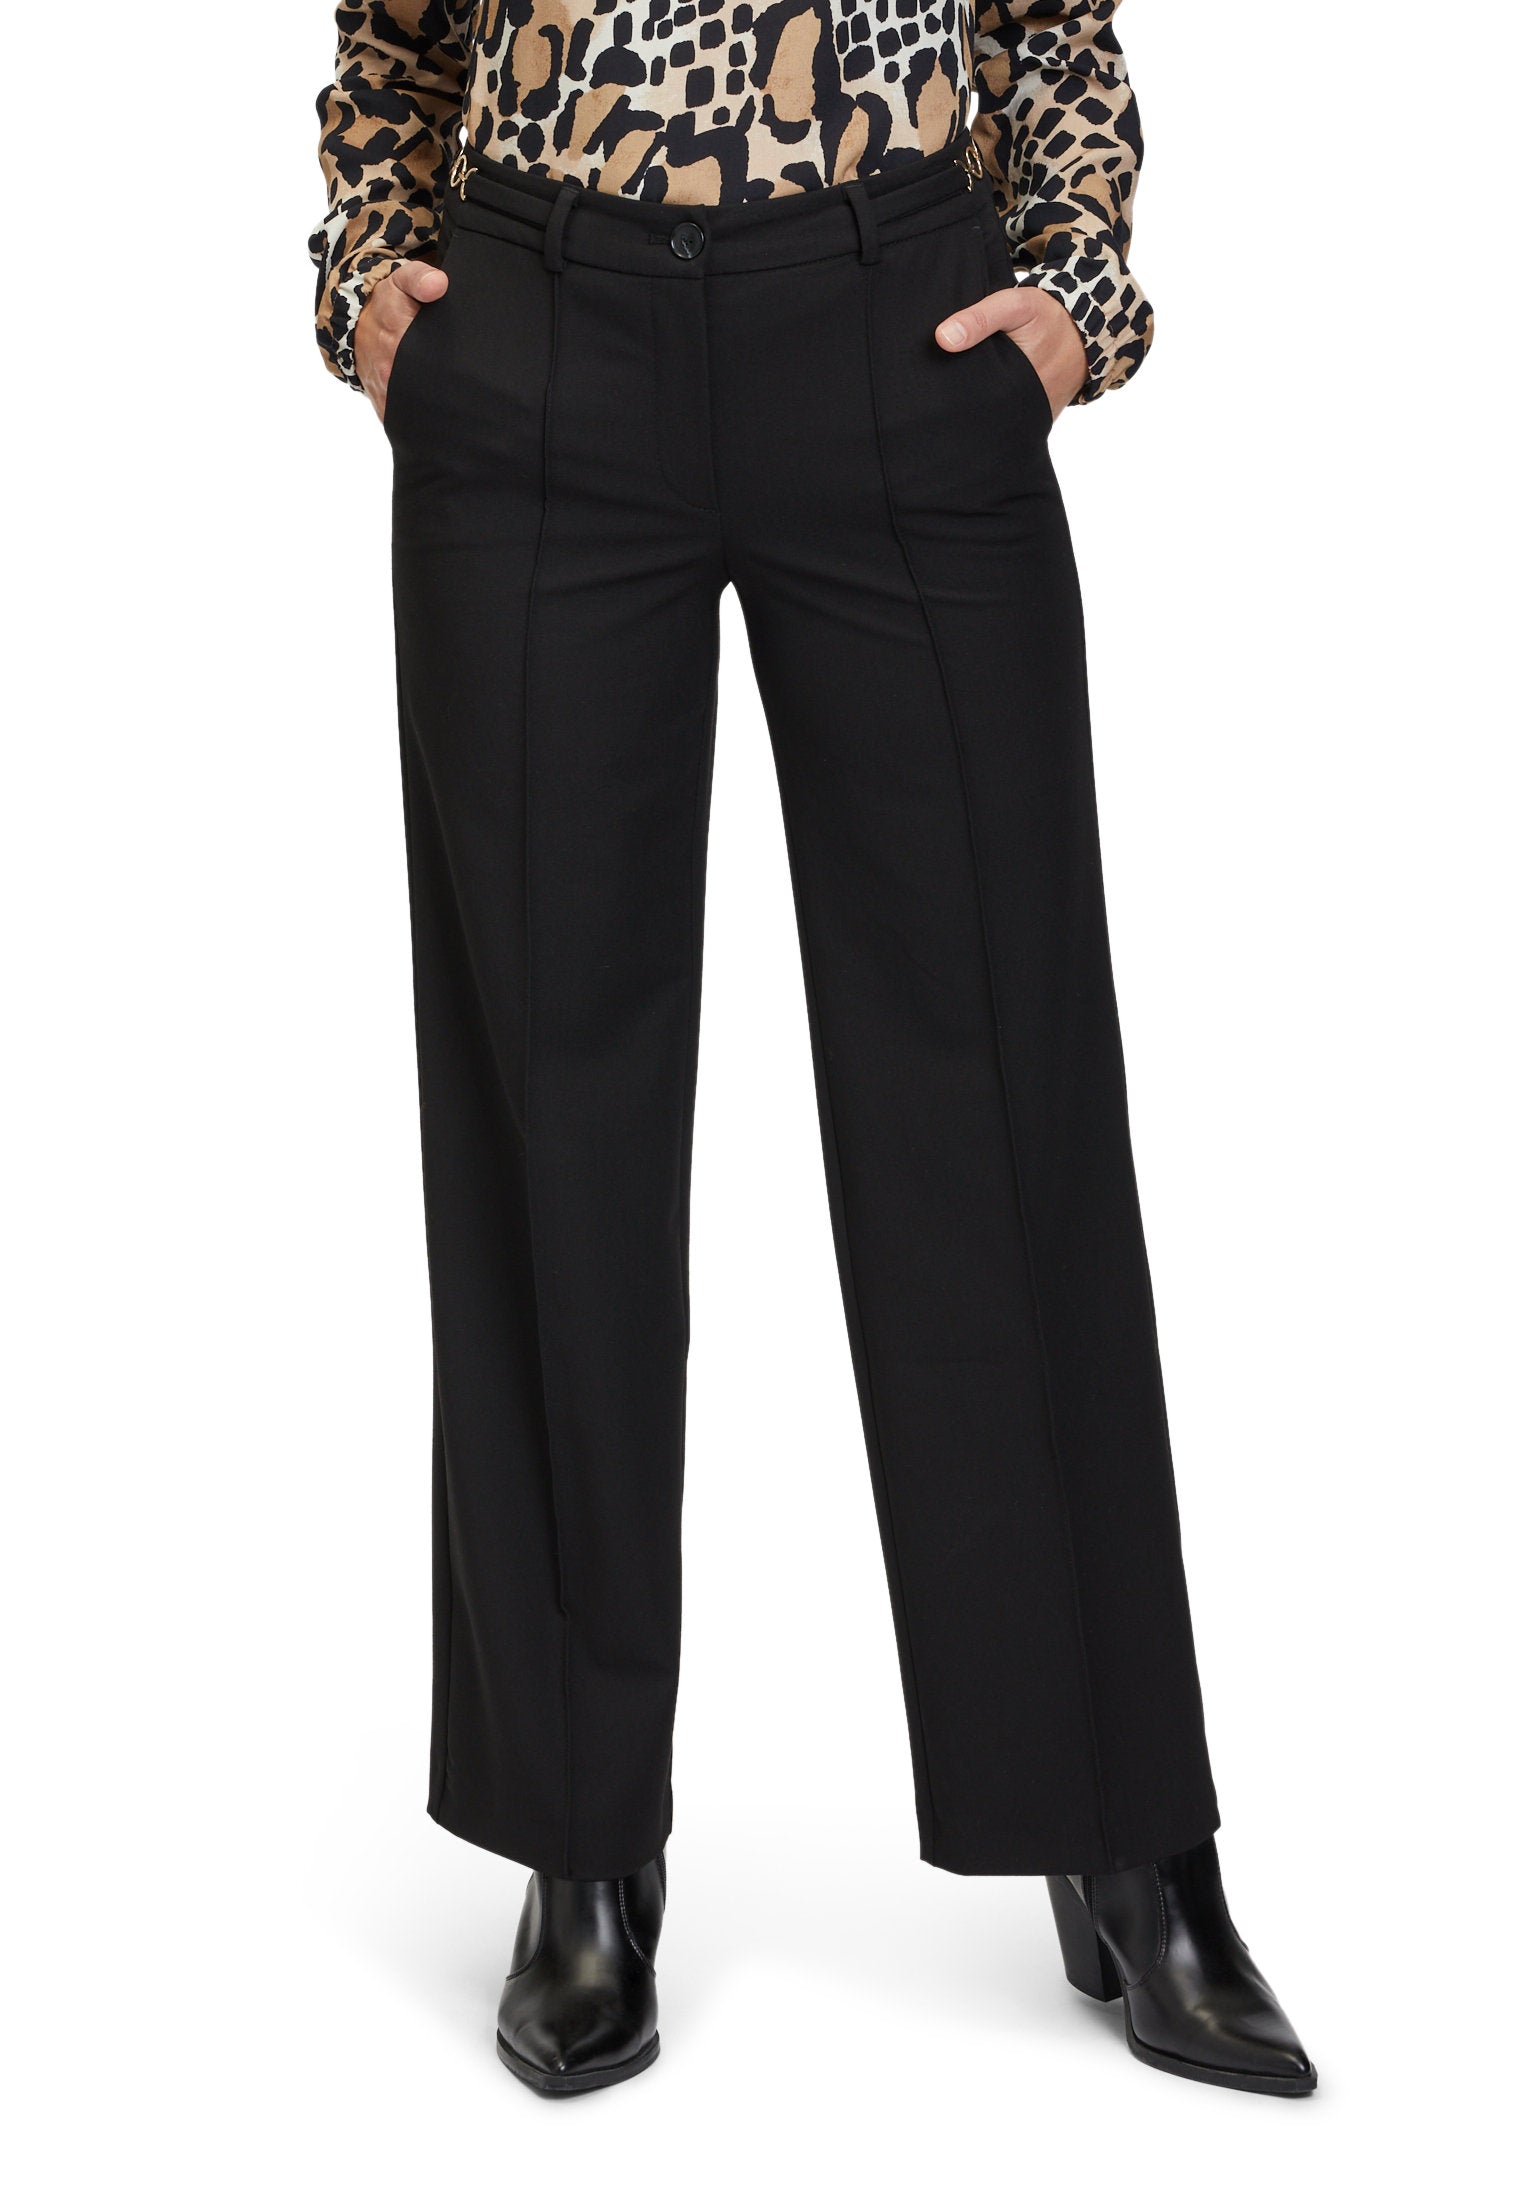 Black Dress Trousers With Center Pleat_6831-1055_9045_03